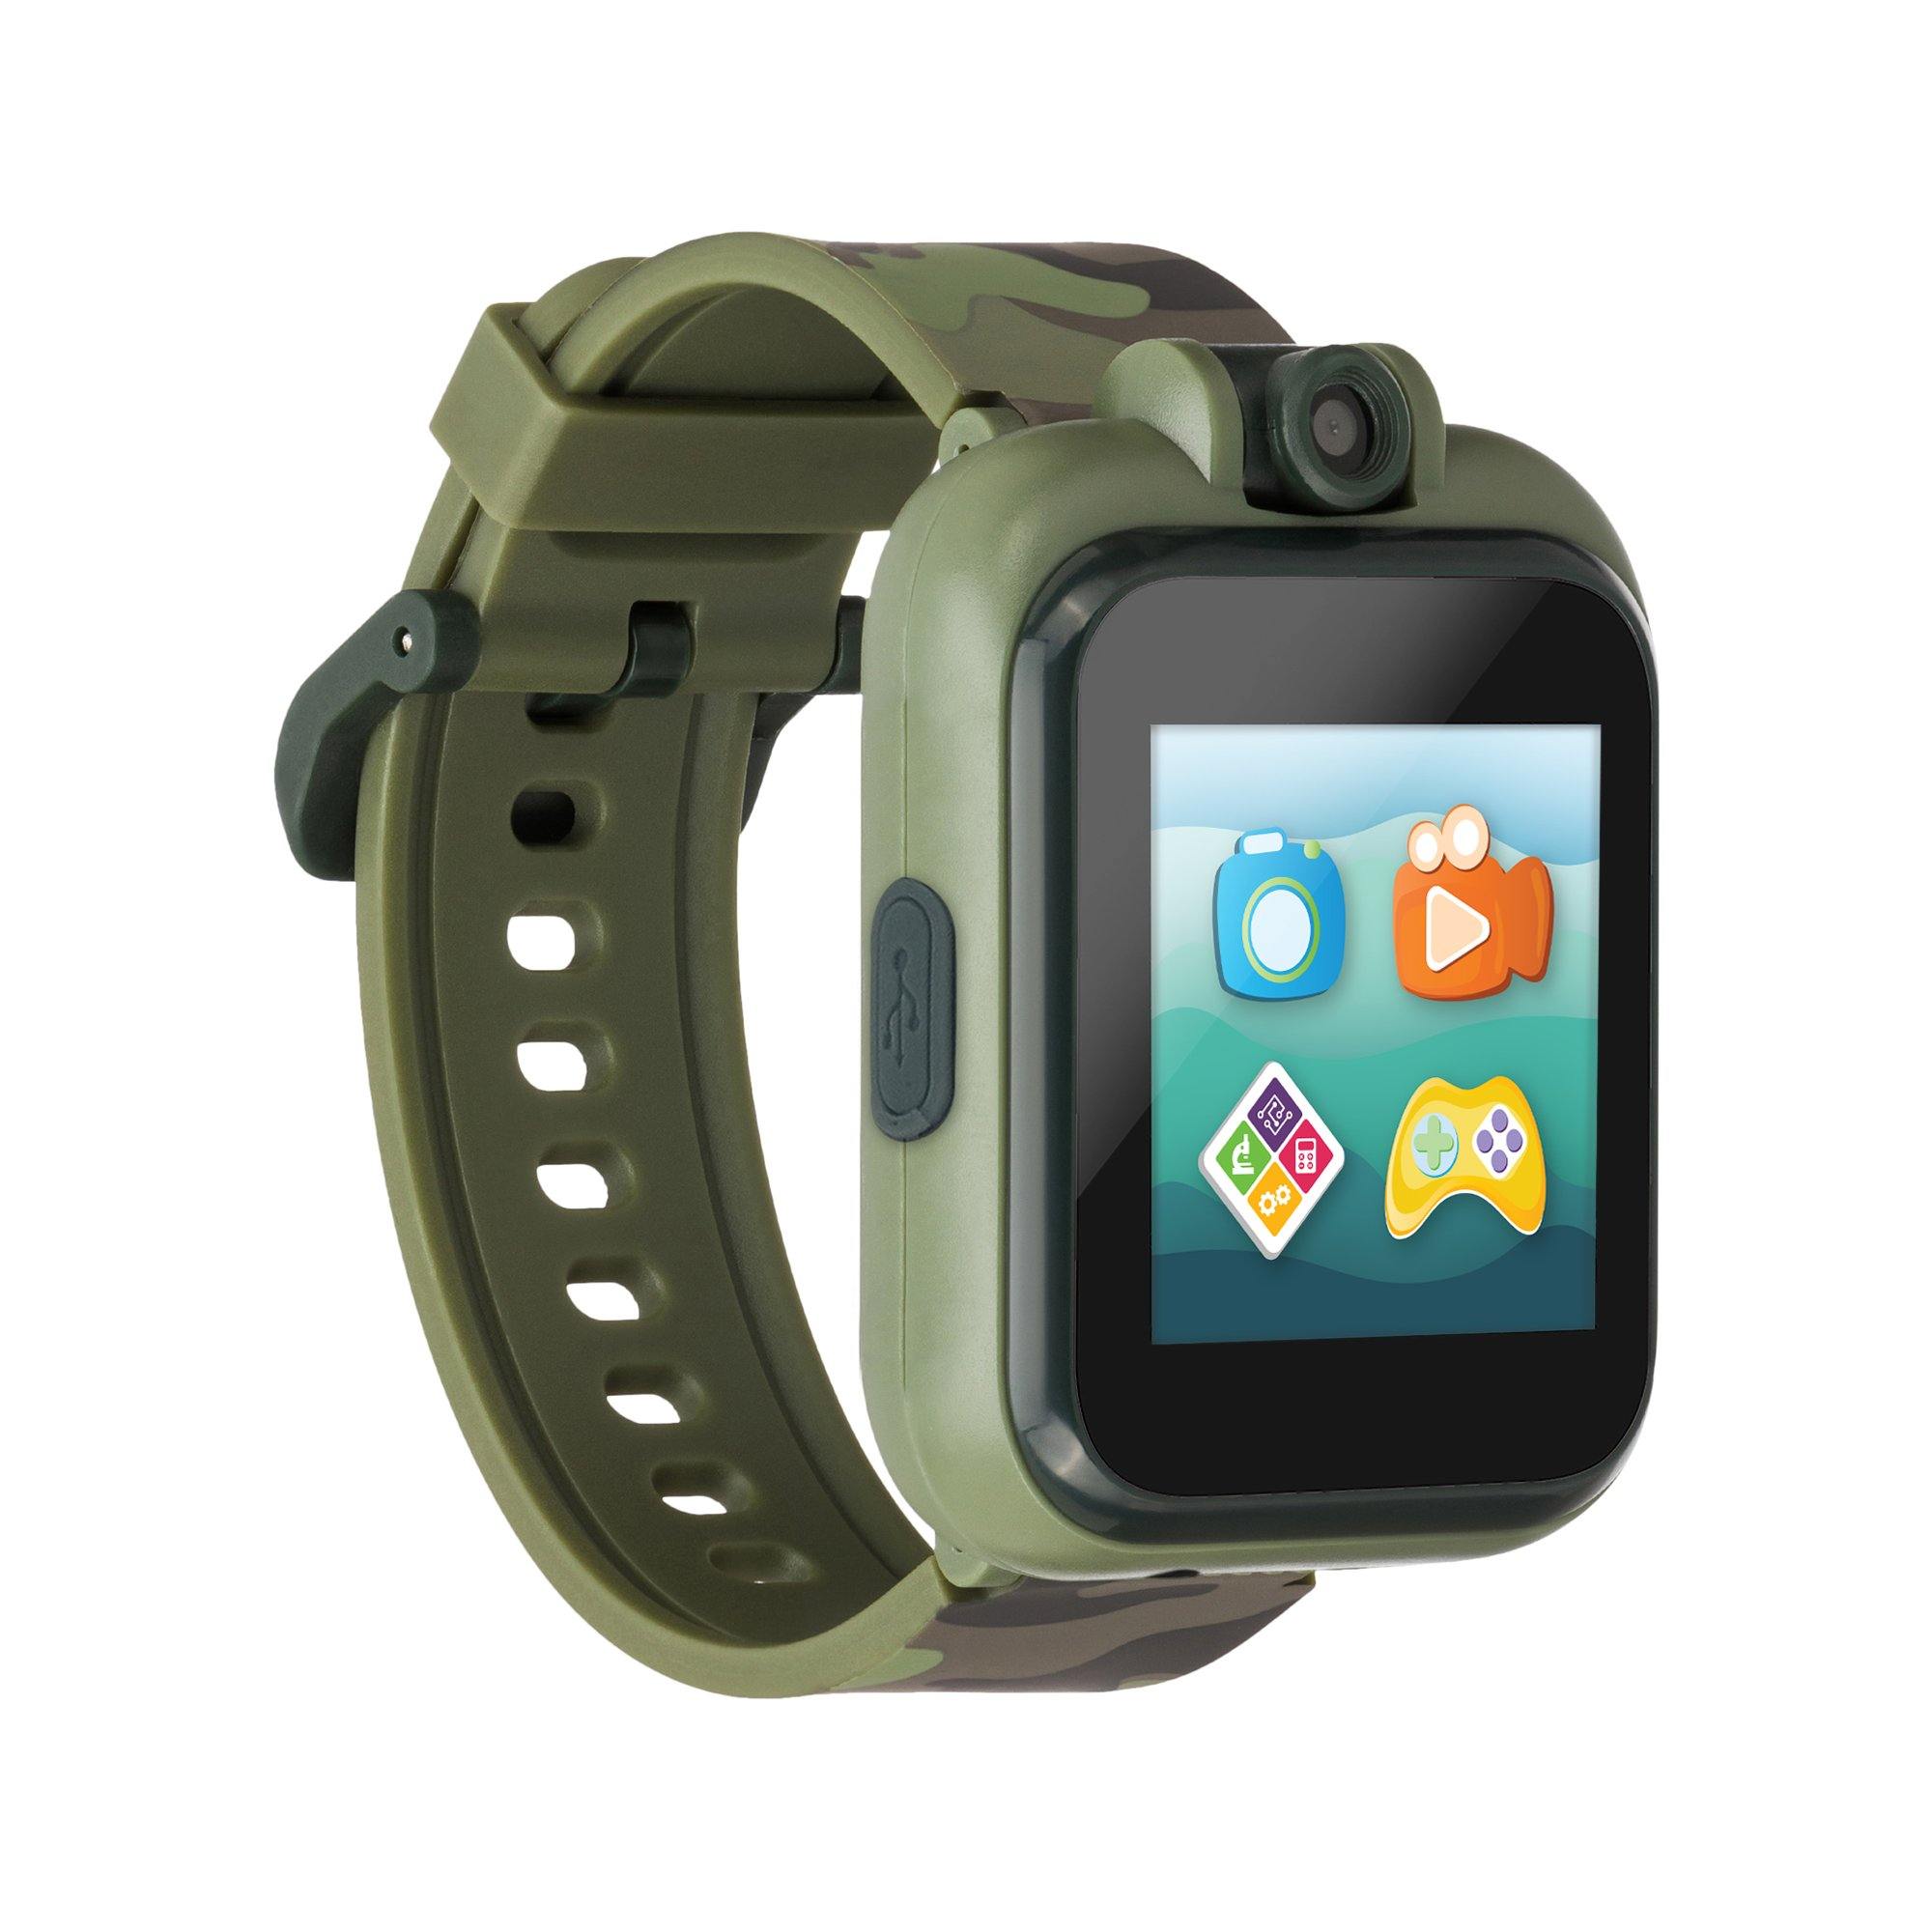 PlayZoom 2 Kids Smartwatch: Olive Camouflage Print affordable smart watch